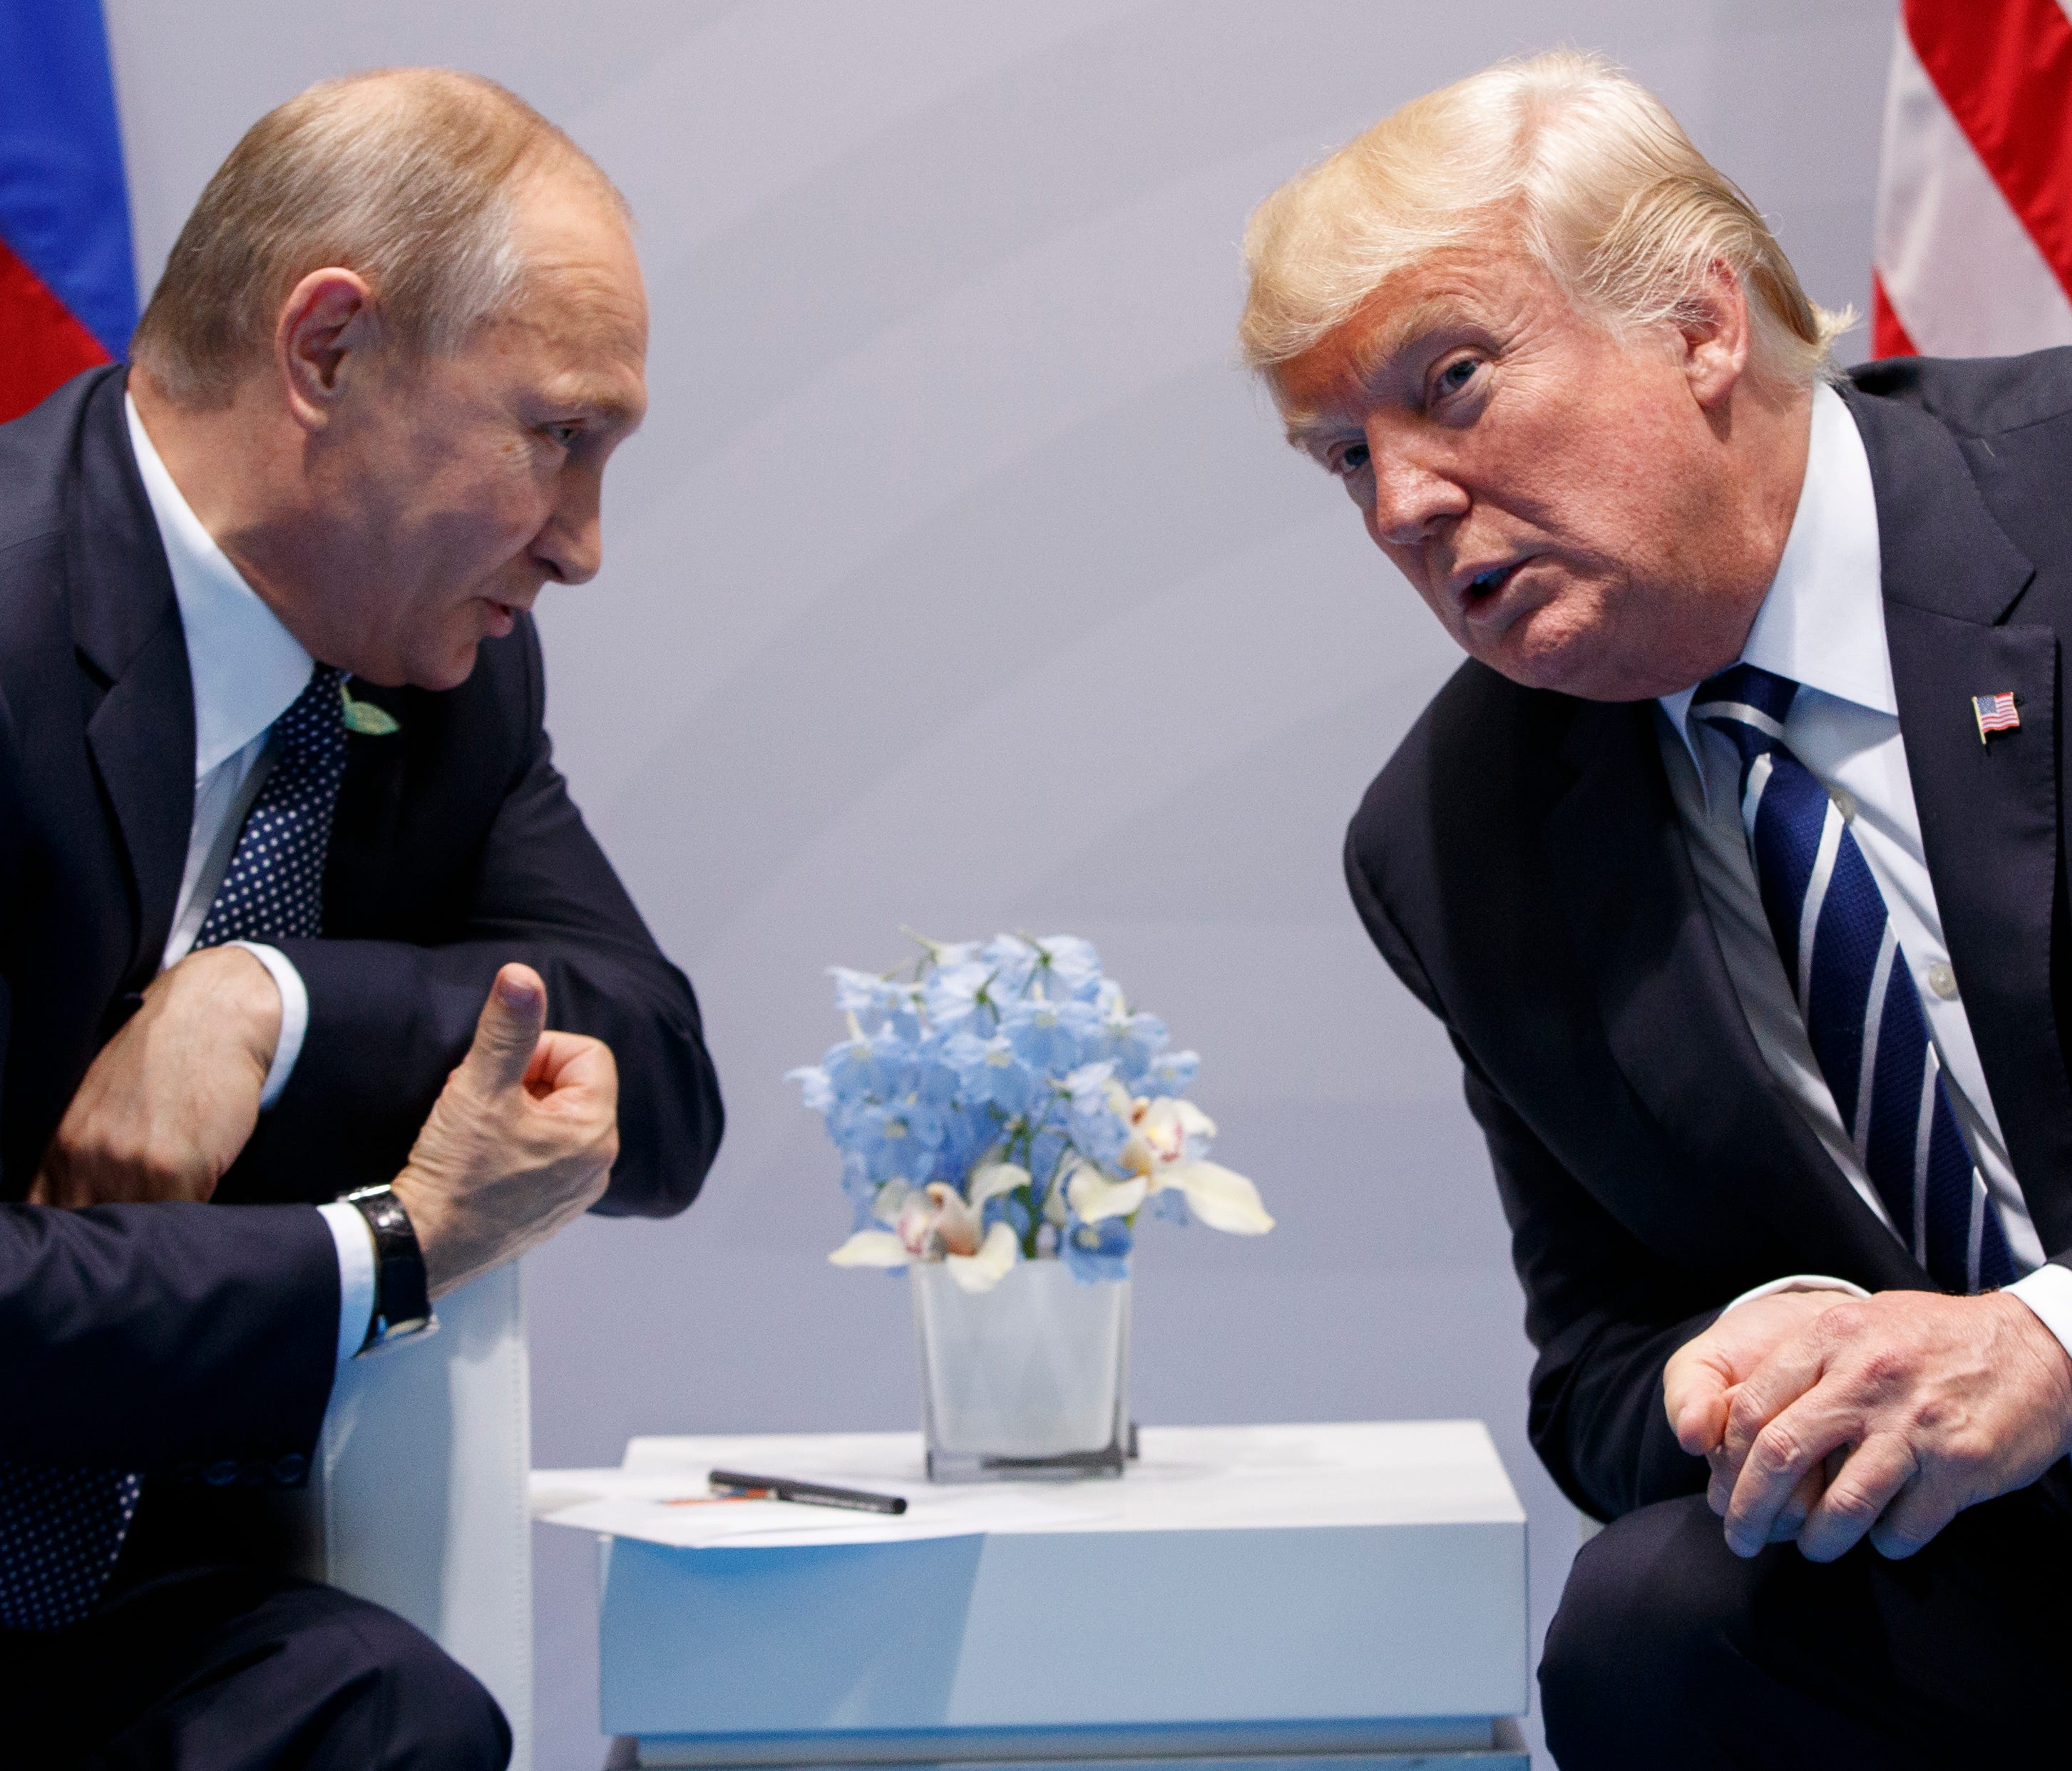 In this July 7, 2017, file photo, President Donald Trump meets with Russian President Vladimir Putin at the G-20 Summit in Hamburg. Trump signed on Aug. 2, what he called a 